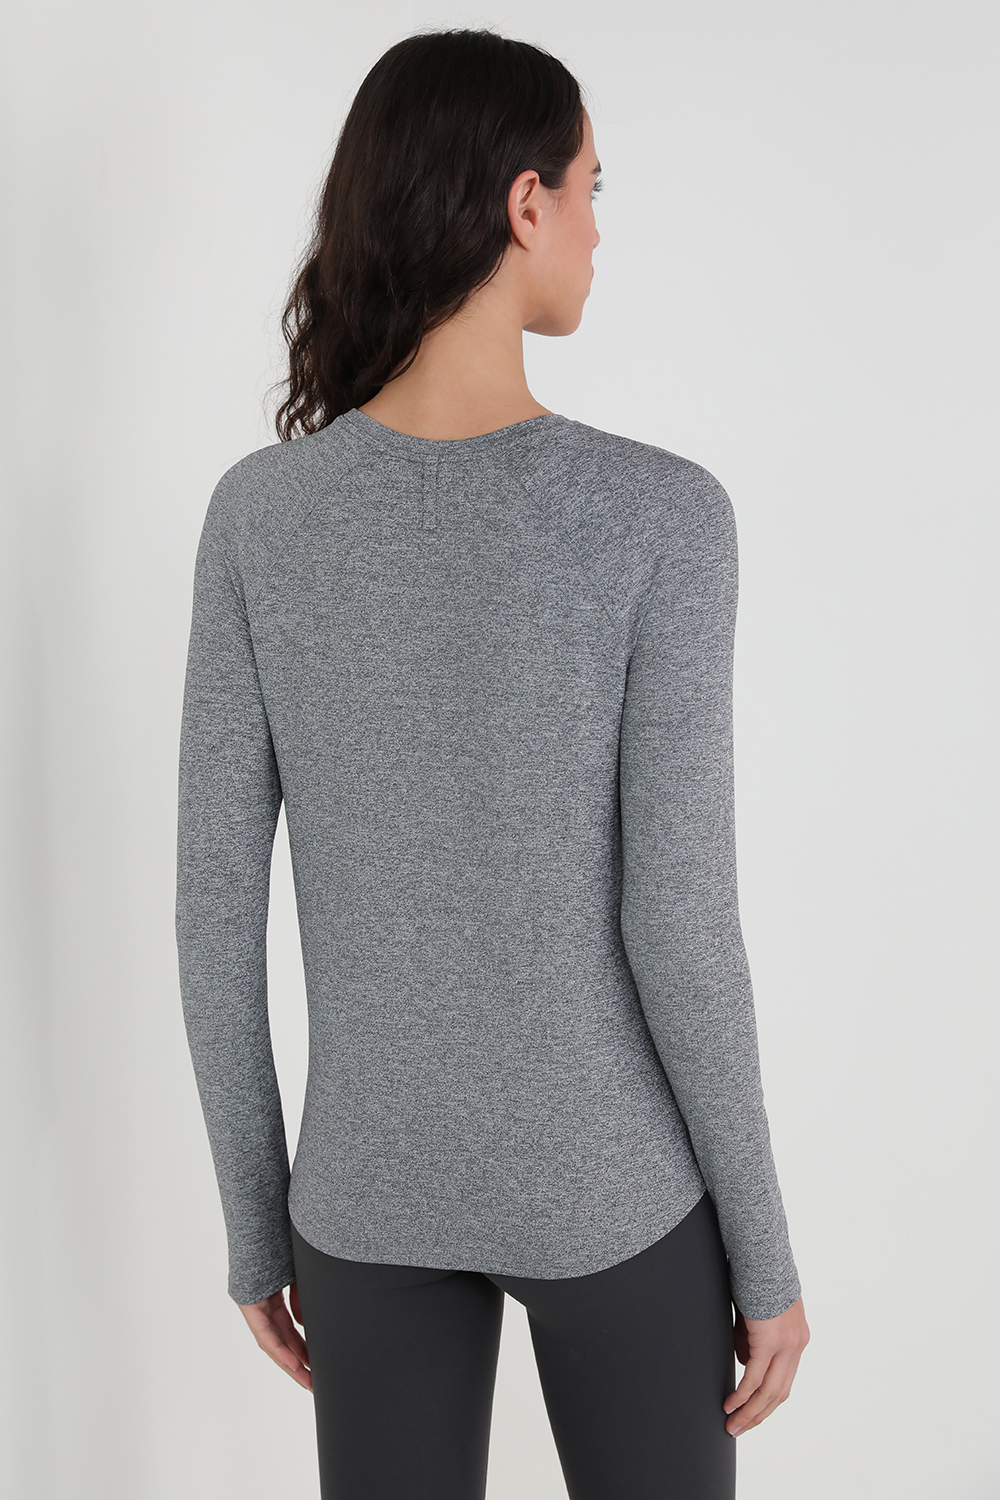 License to Train Classic Fit Long Sleeve LULULEMON